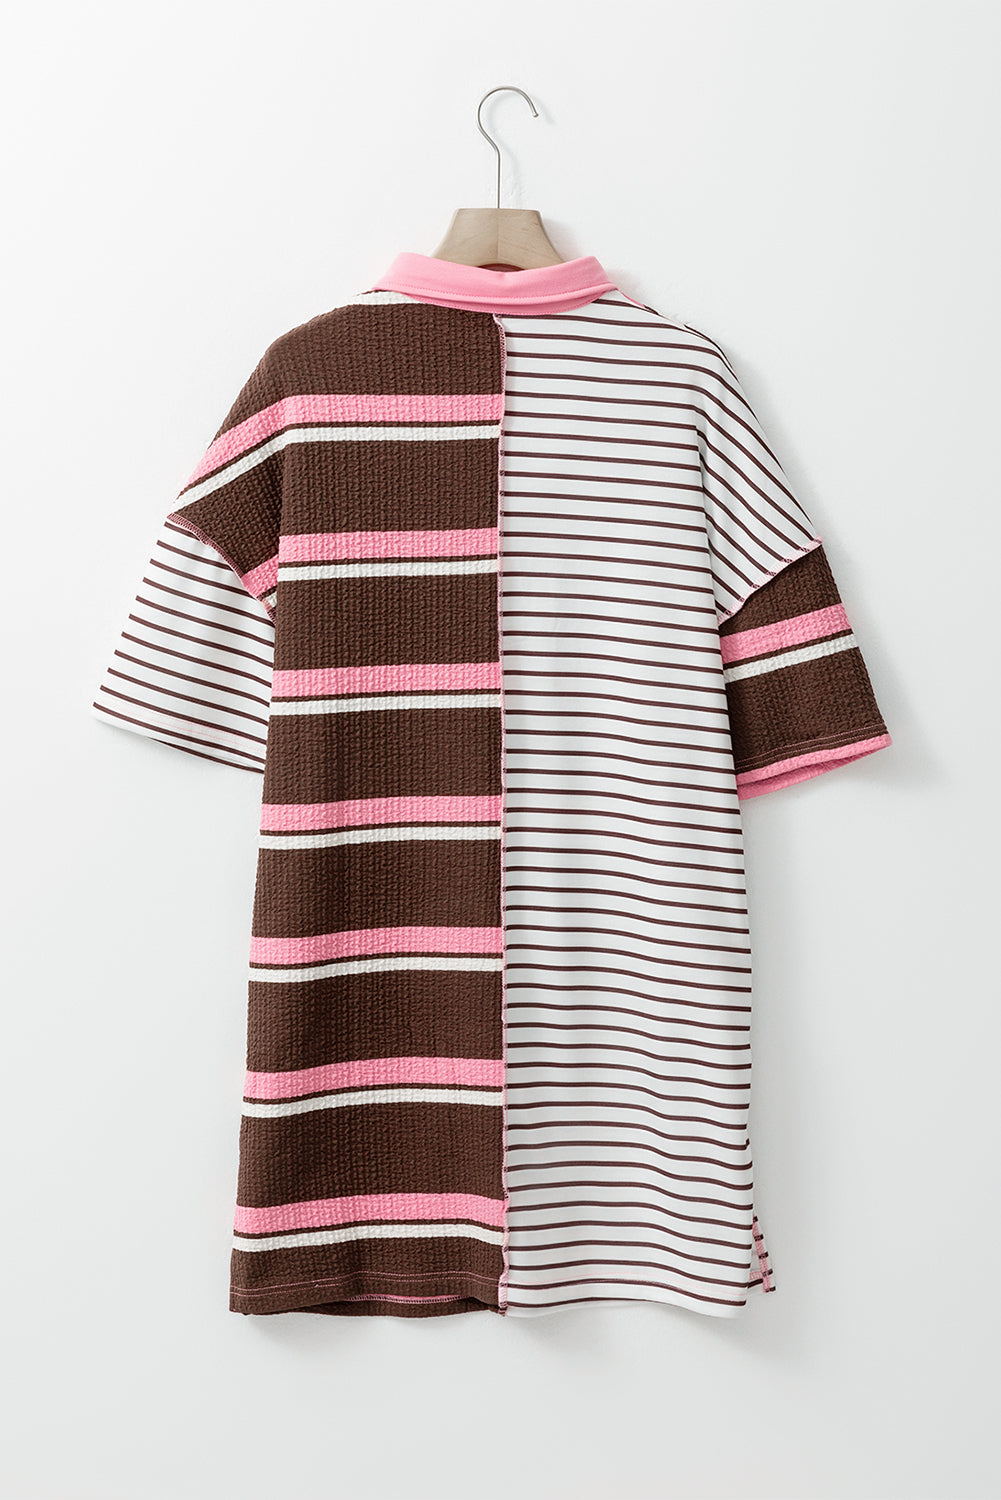 Brown Stripe Striped Textured Patchwork Buttoned T Shirt Dress Blue Zone Planet